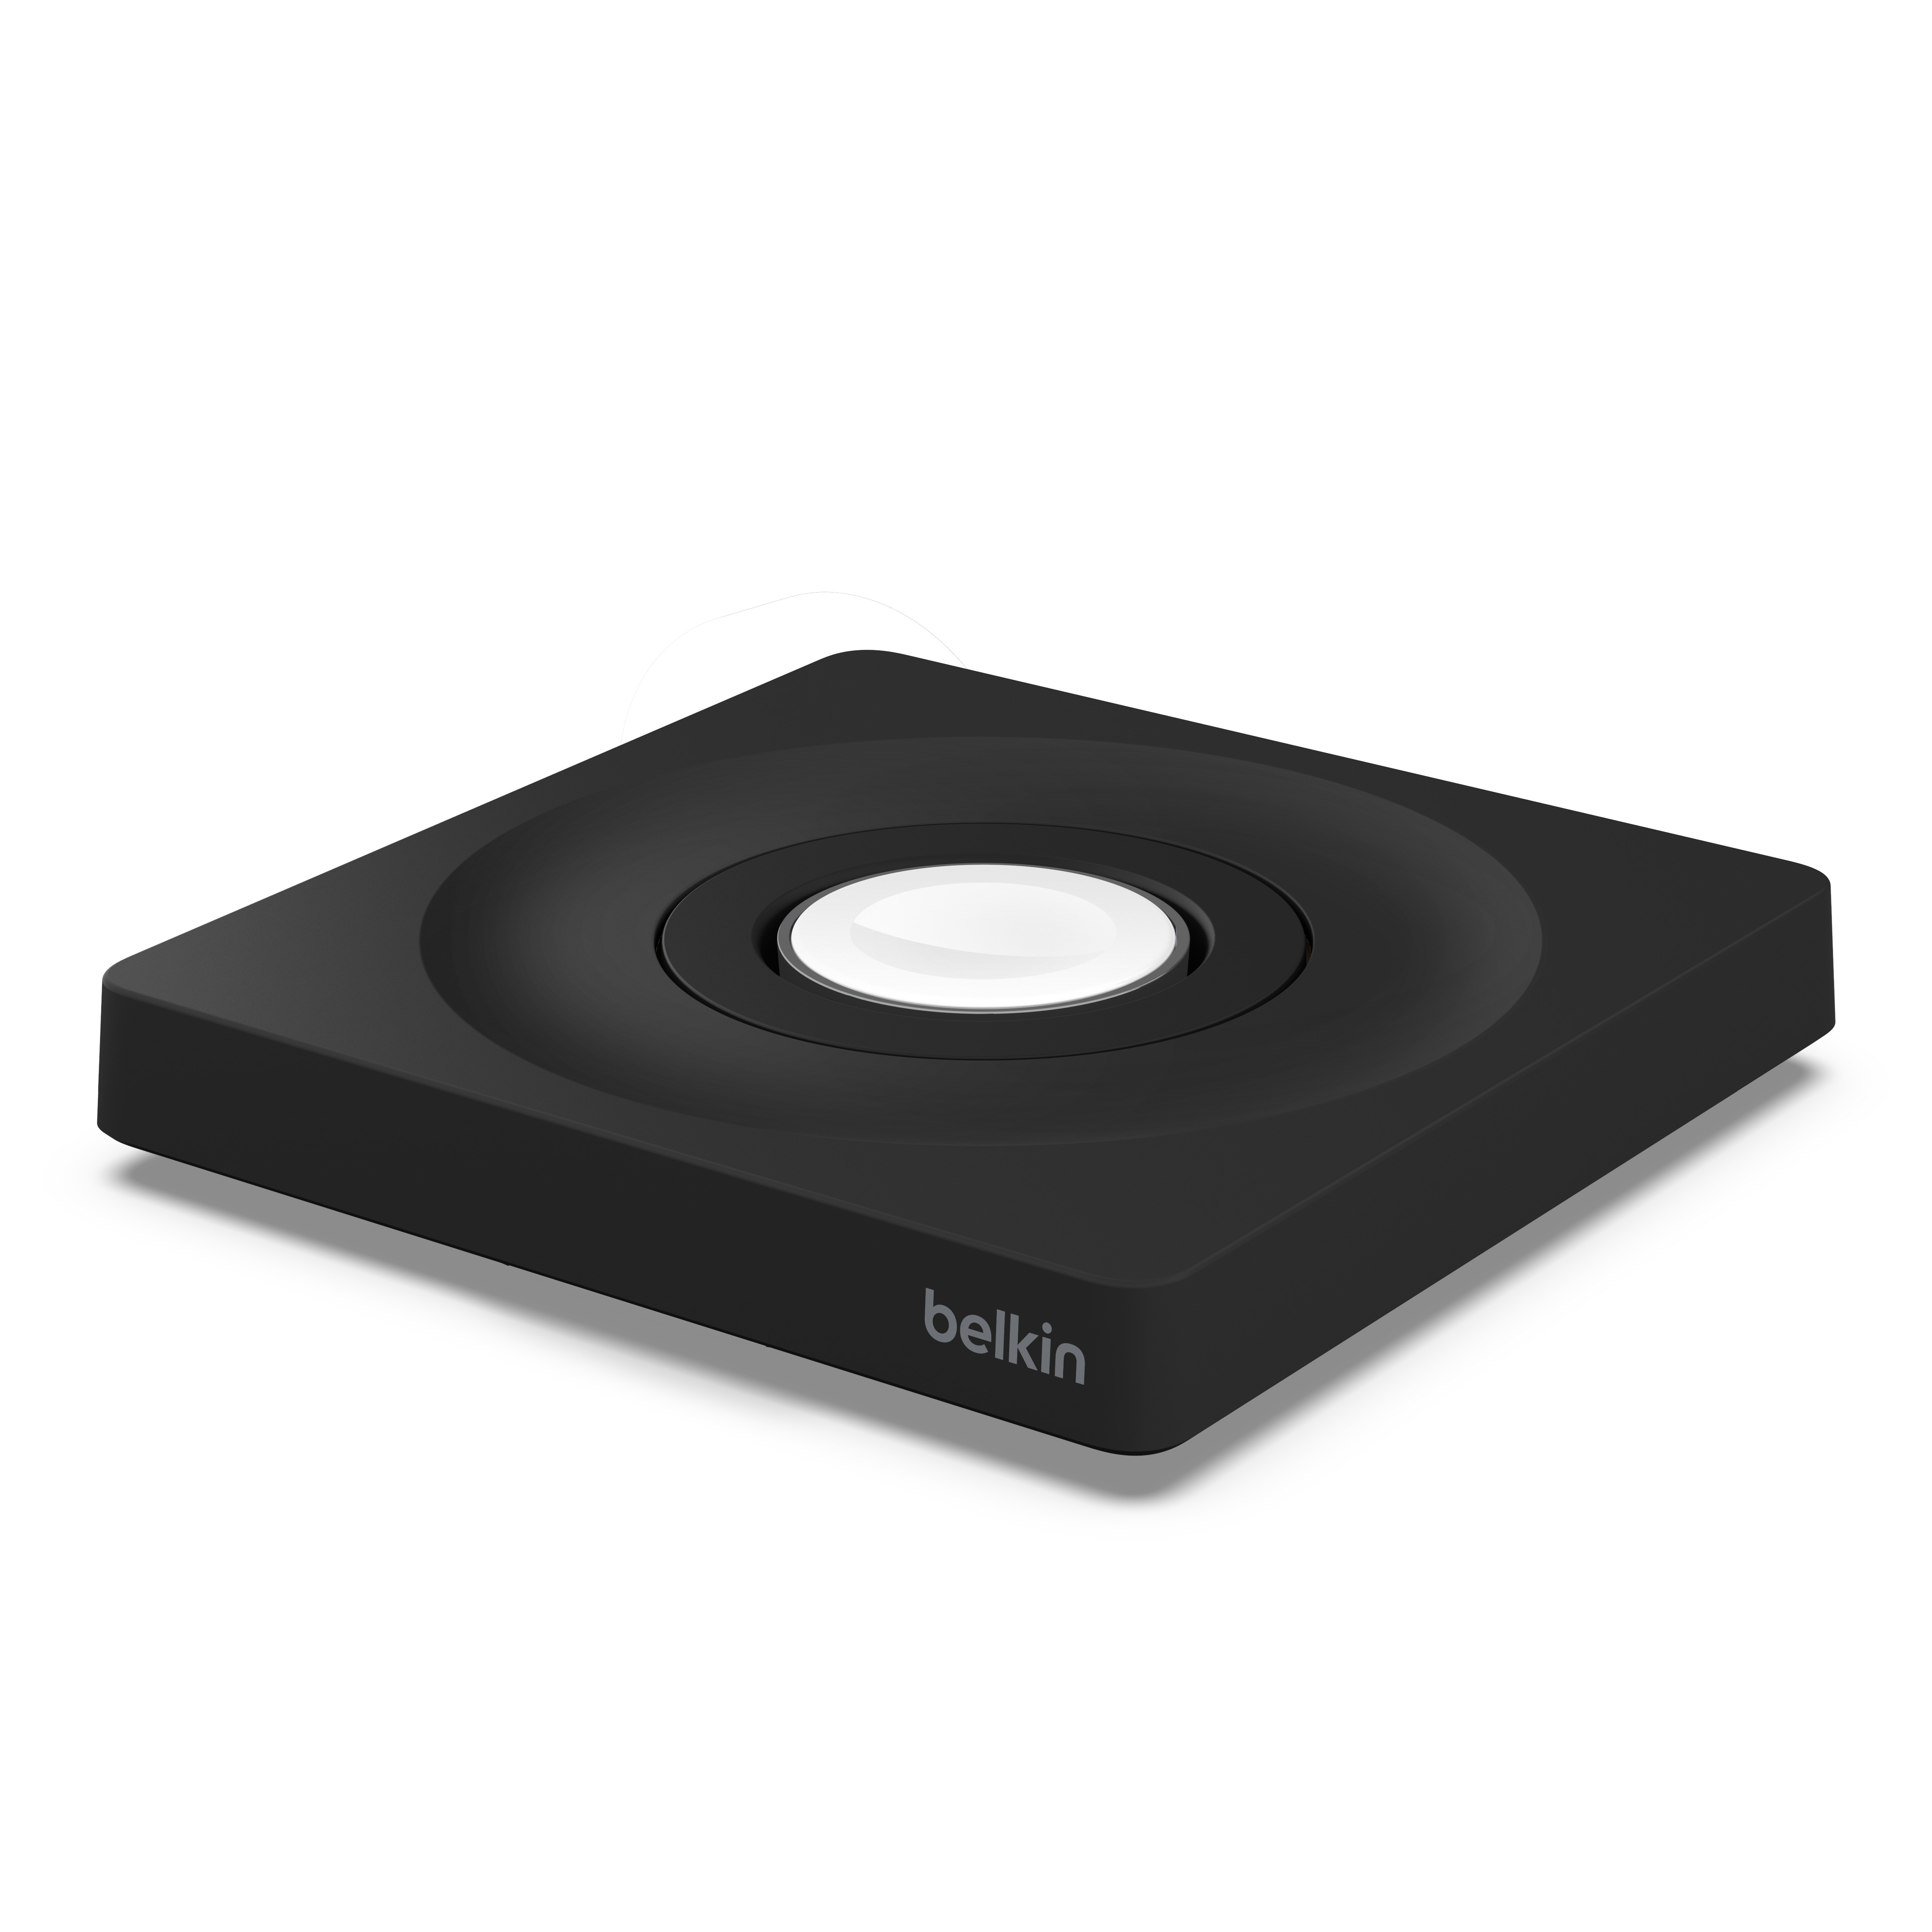 With the Belkin Boost Charge Pro, the charging puck folds down into the base for easy portability.